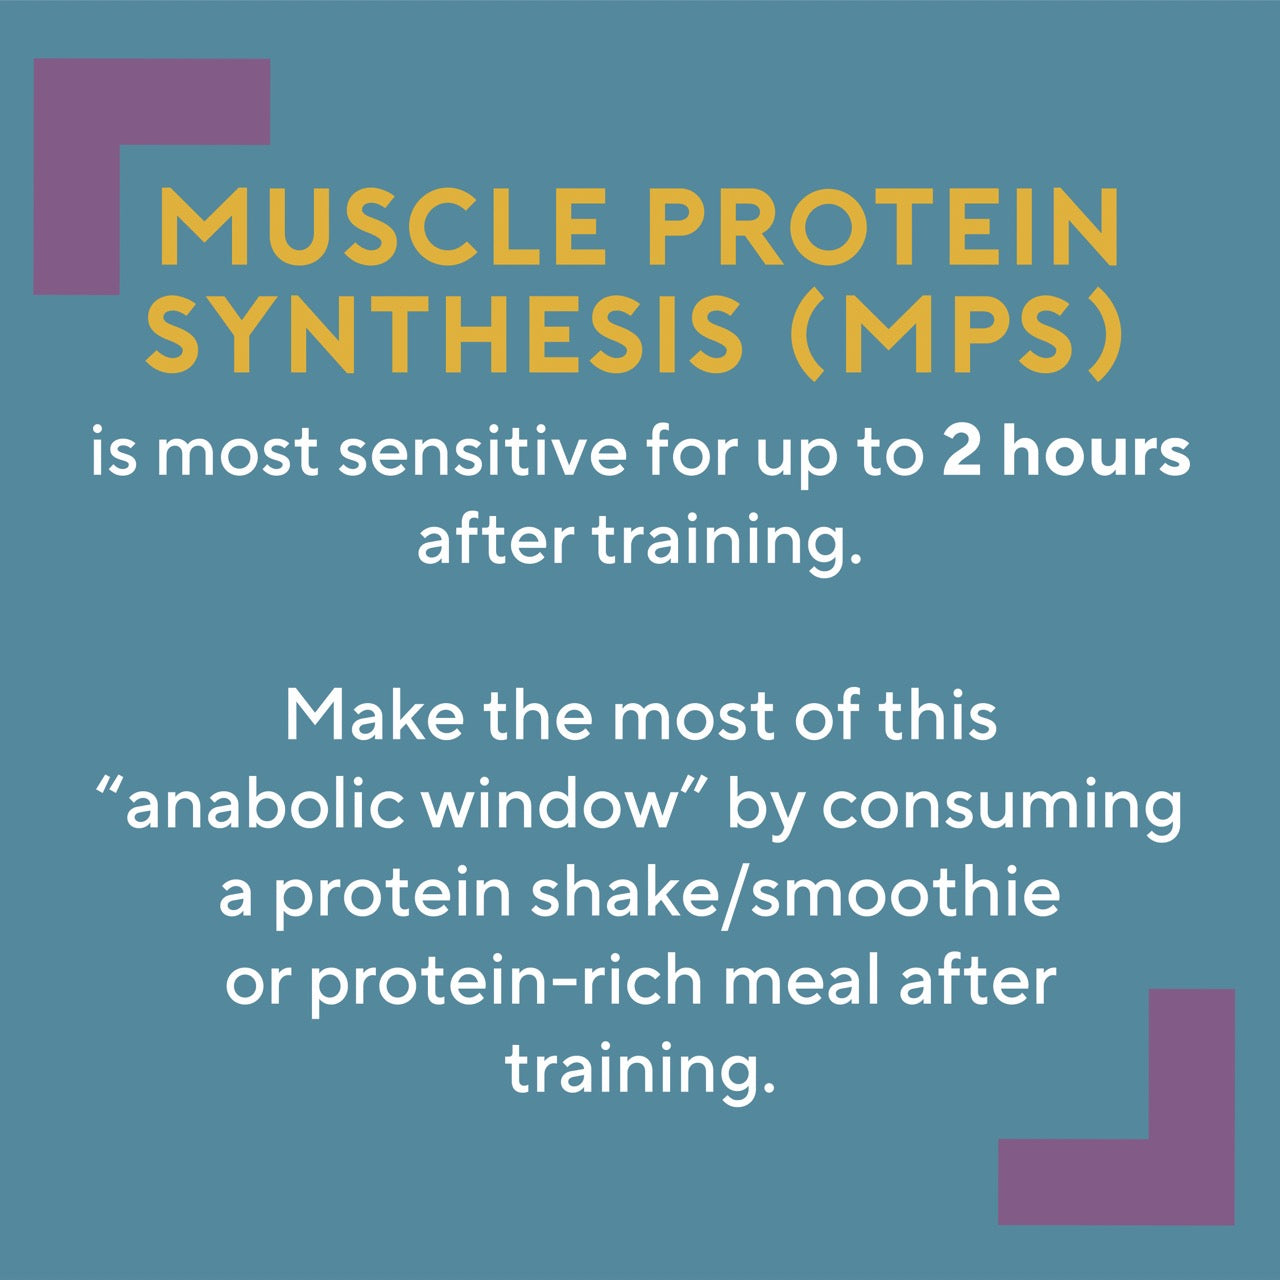 Muscle Protein Synthesis and the Anabolic Window